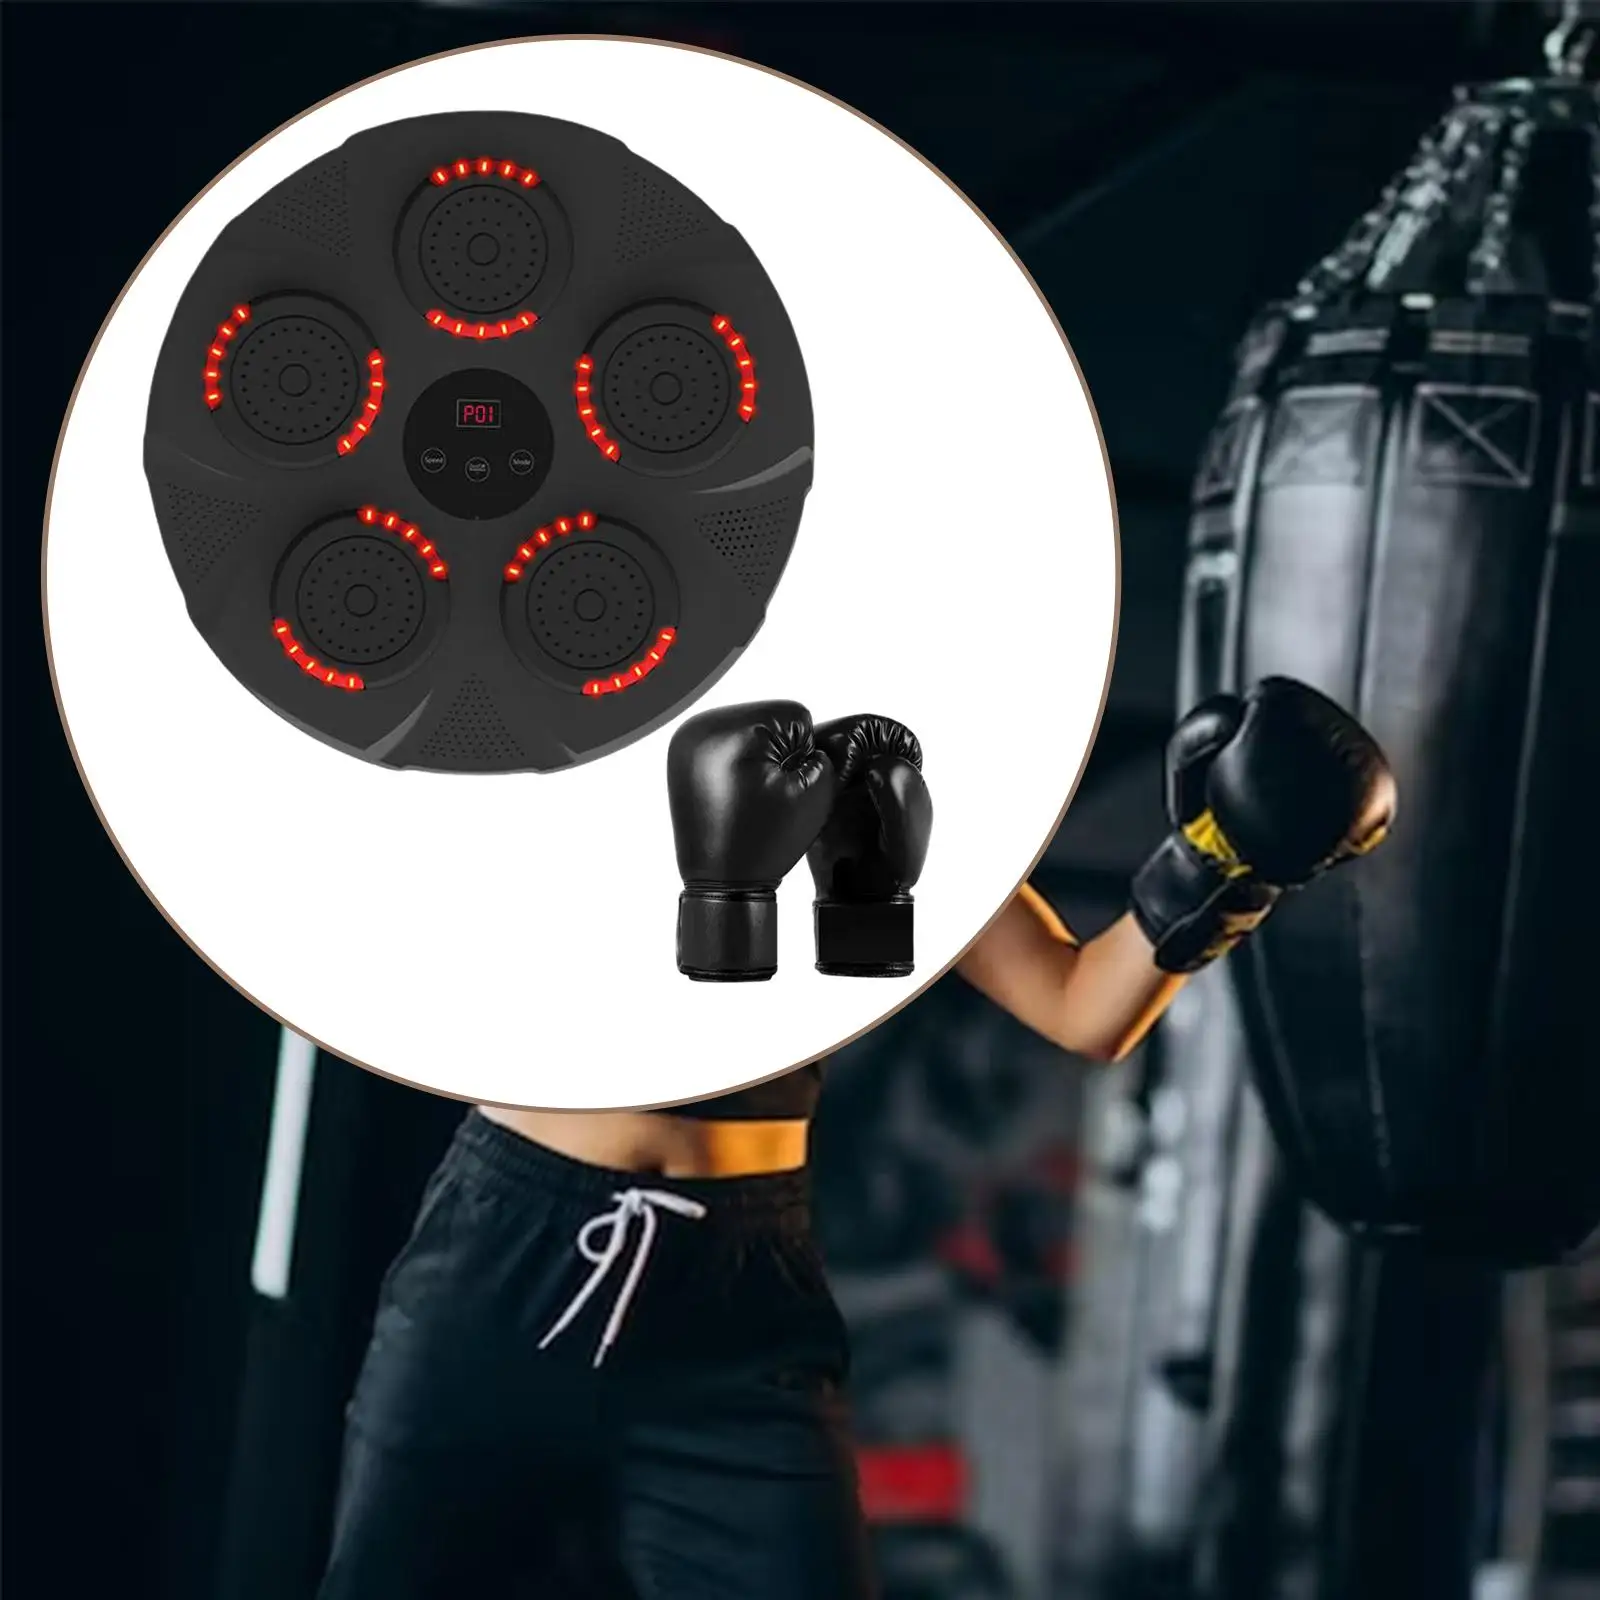 Smart Electronic Wall Target Music Boxing Training Machine, Competitions Game